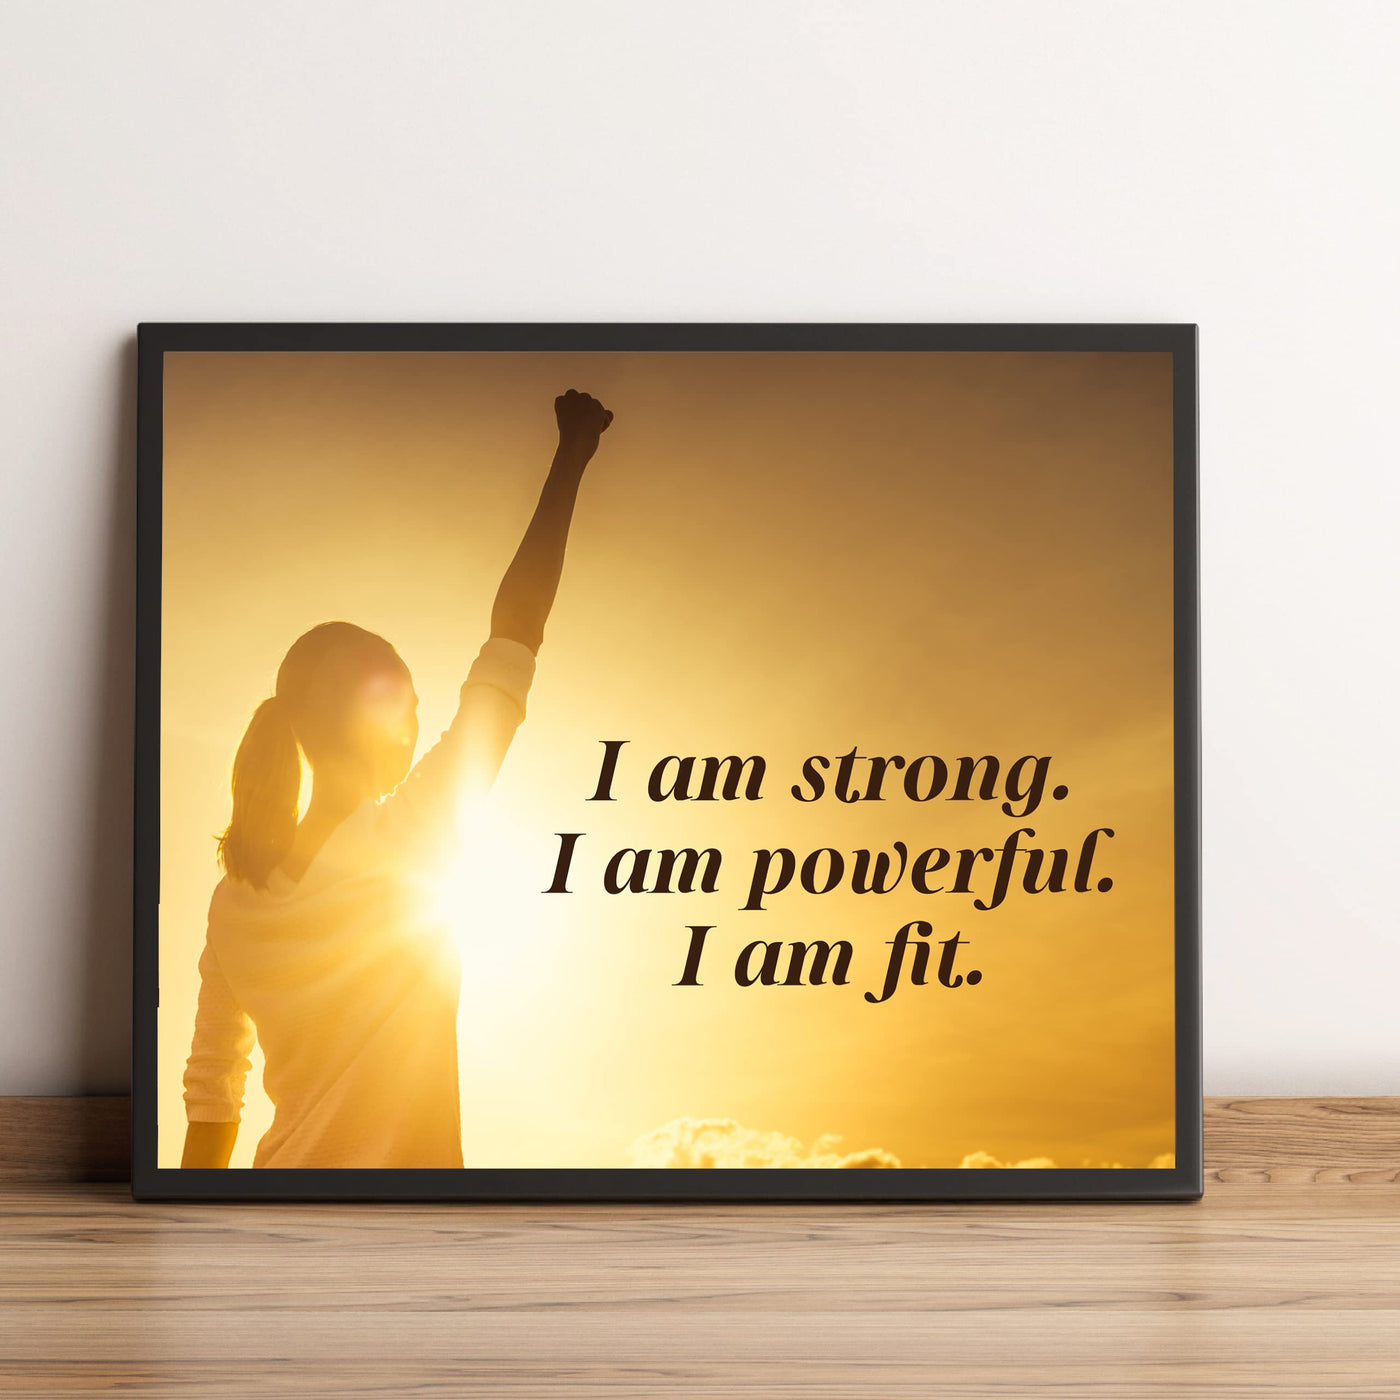 I Am Strong, Powerful, & Fit Motivational Quotes Wall Art -10x8" Exercise & Fitness Sunset Print -Ready to Frame. Inspirational Decor for Home-Office-School-Gym-Studio. Great Gift for Motivation!